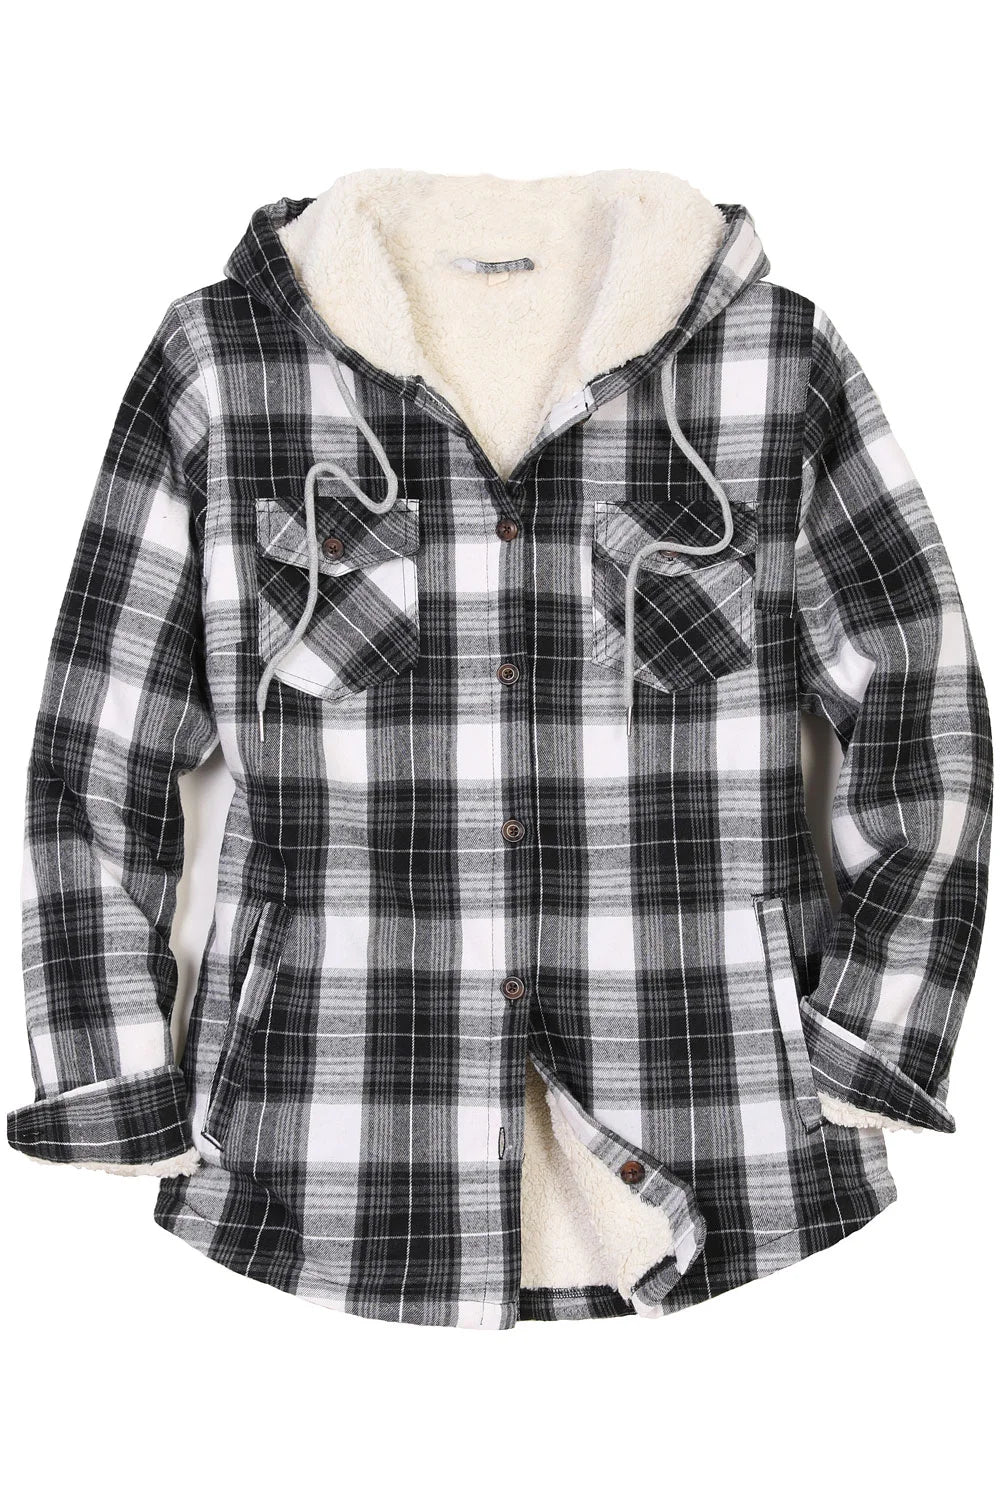 Women's Sherpa Lined Flannel Jacket with Hood,Button Up Plaid